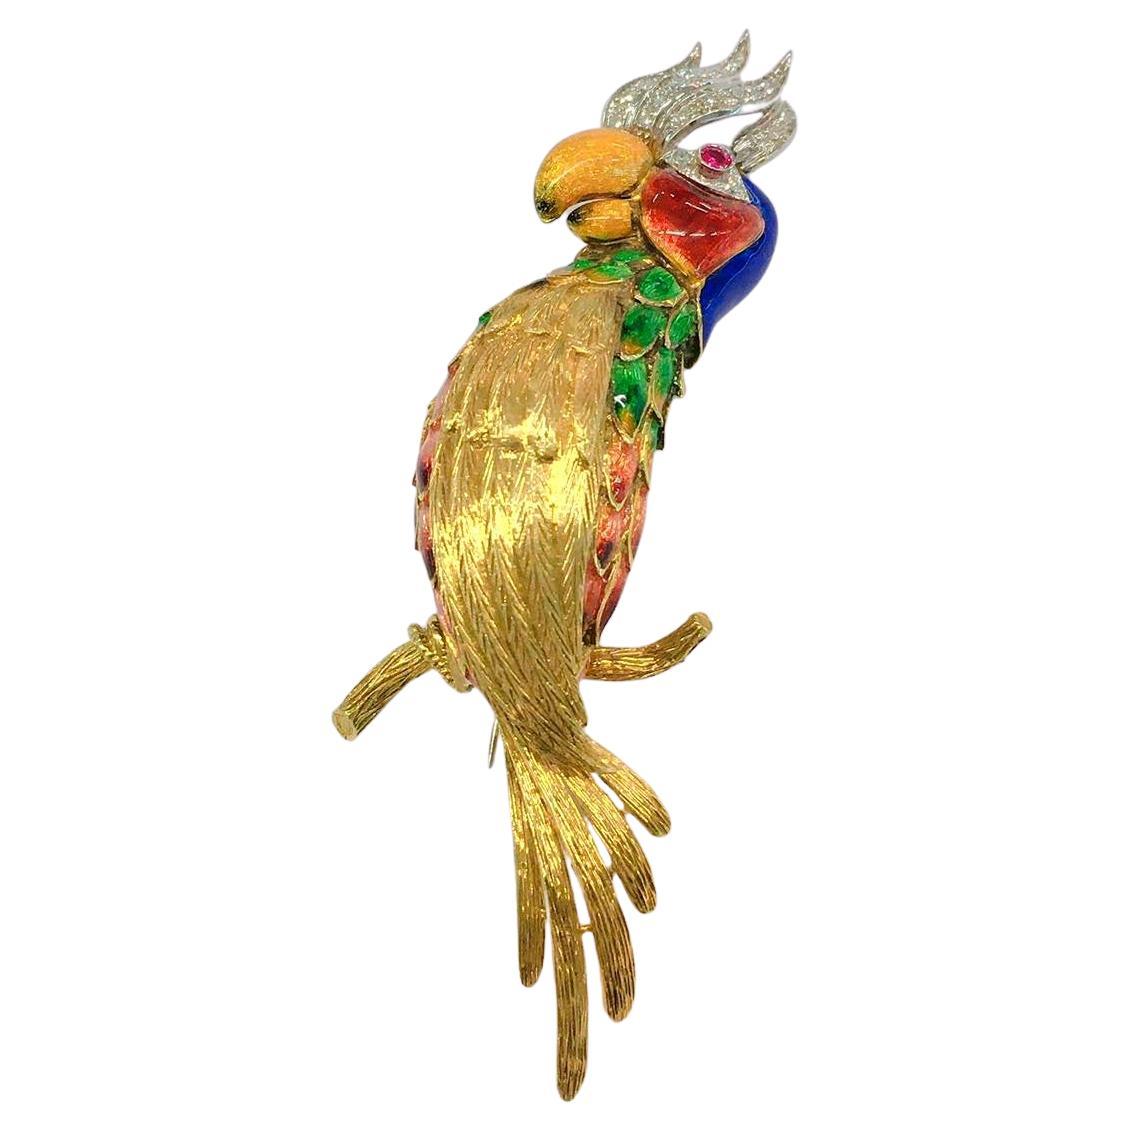 Vintage large heavy 18k gold brooch in a parrot designe with colorful enamel topped with brilliant cut diamonds and natural ruby eyes with a total gold weight 34 grams and brooch lenght 10cm made in europe 1940/1950.c hall marked 750 gold standard